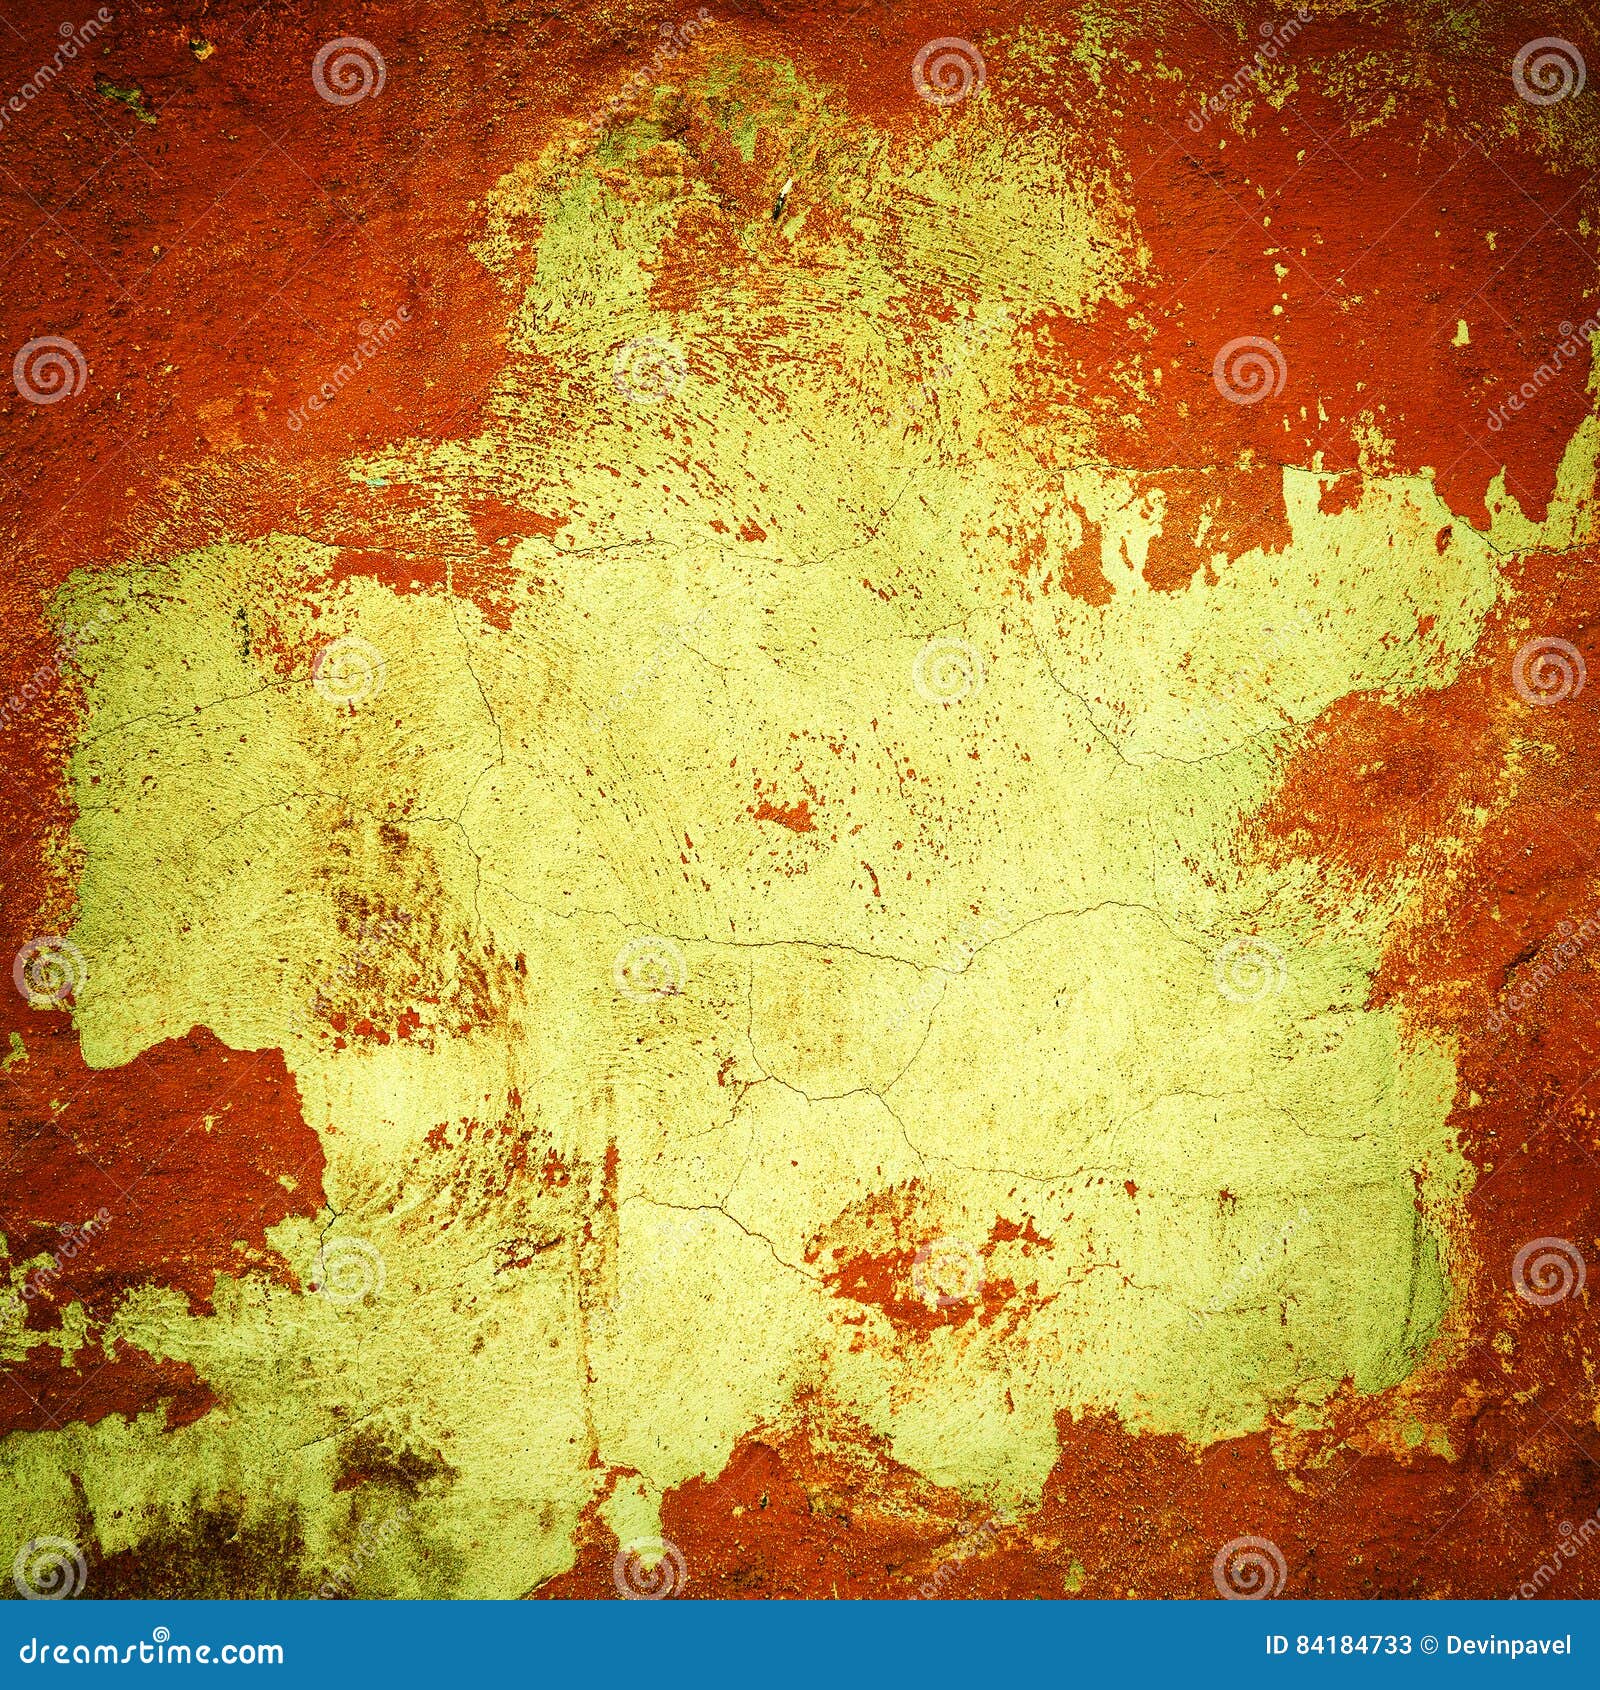 Rough Wall with Cracks. Grunge Red Background with Big Yellow Spot in the  Center Stock Image - Image of retro, antique: 84184733